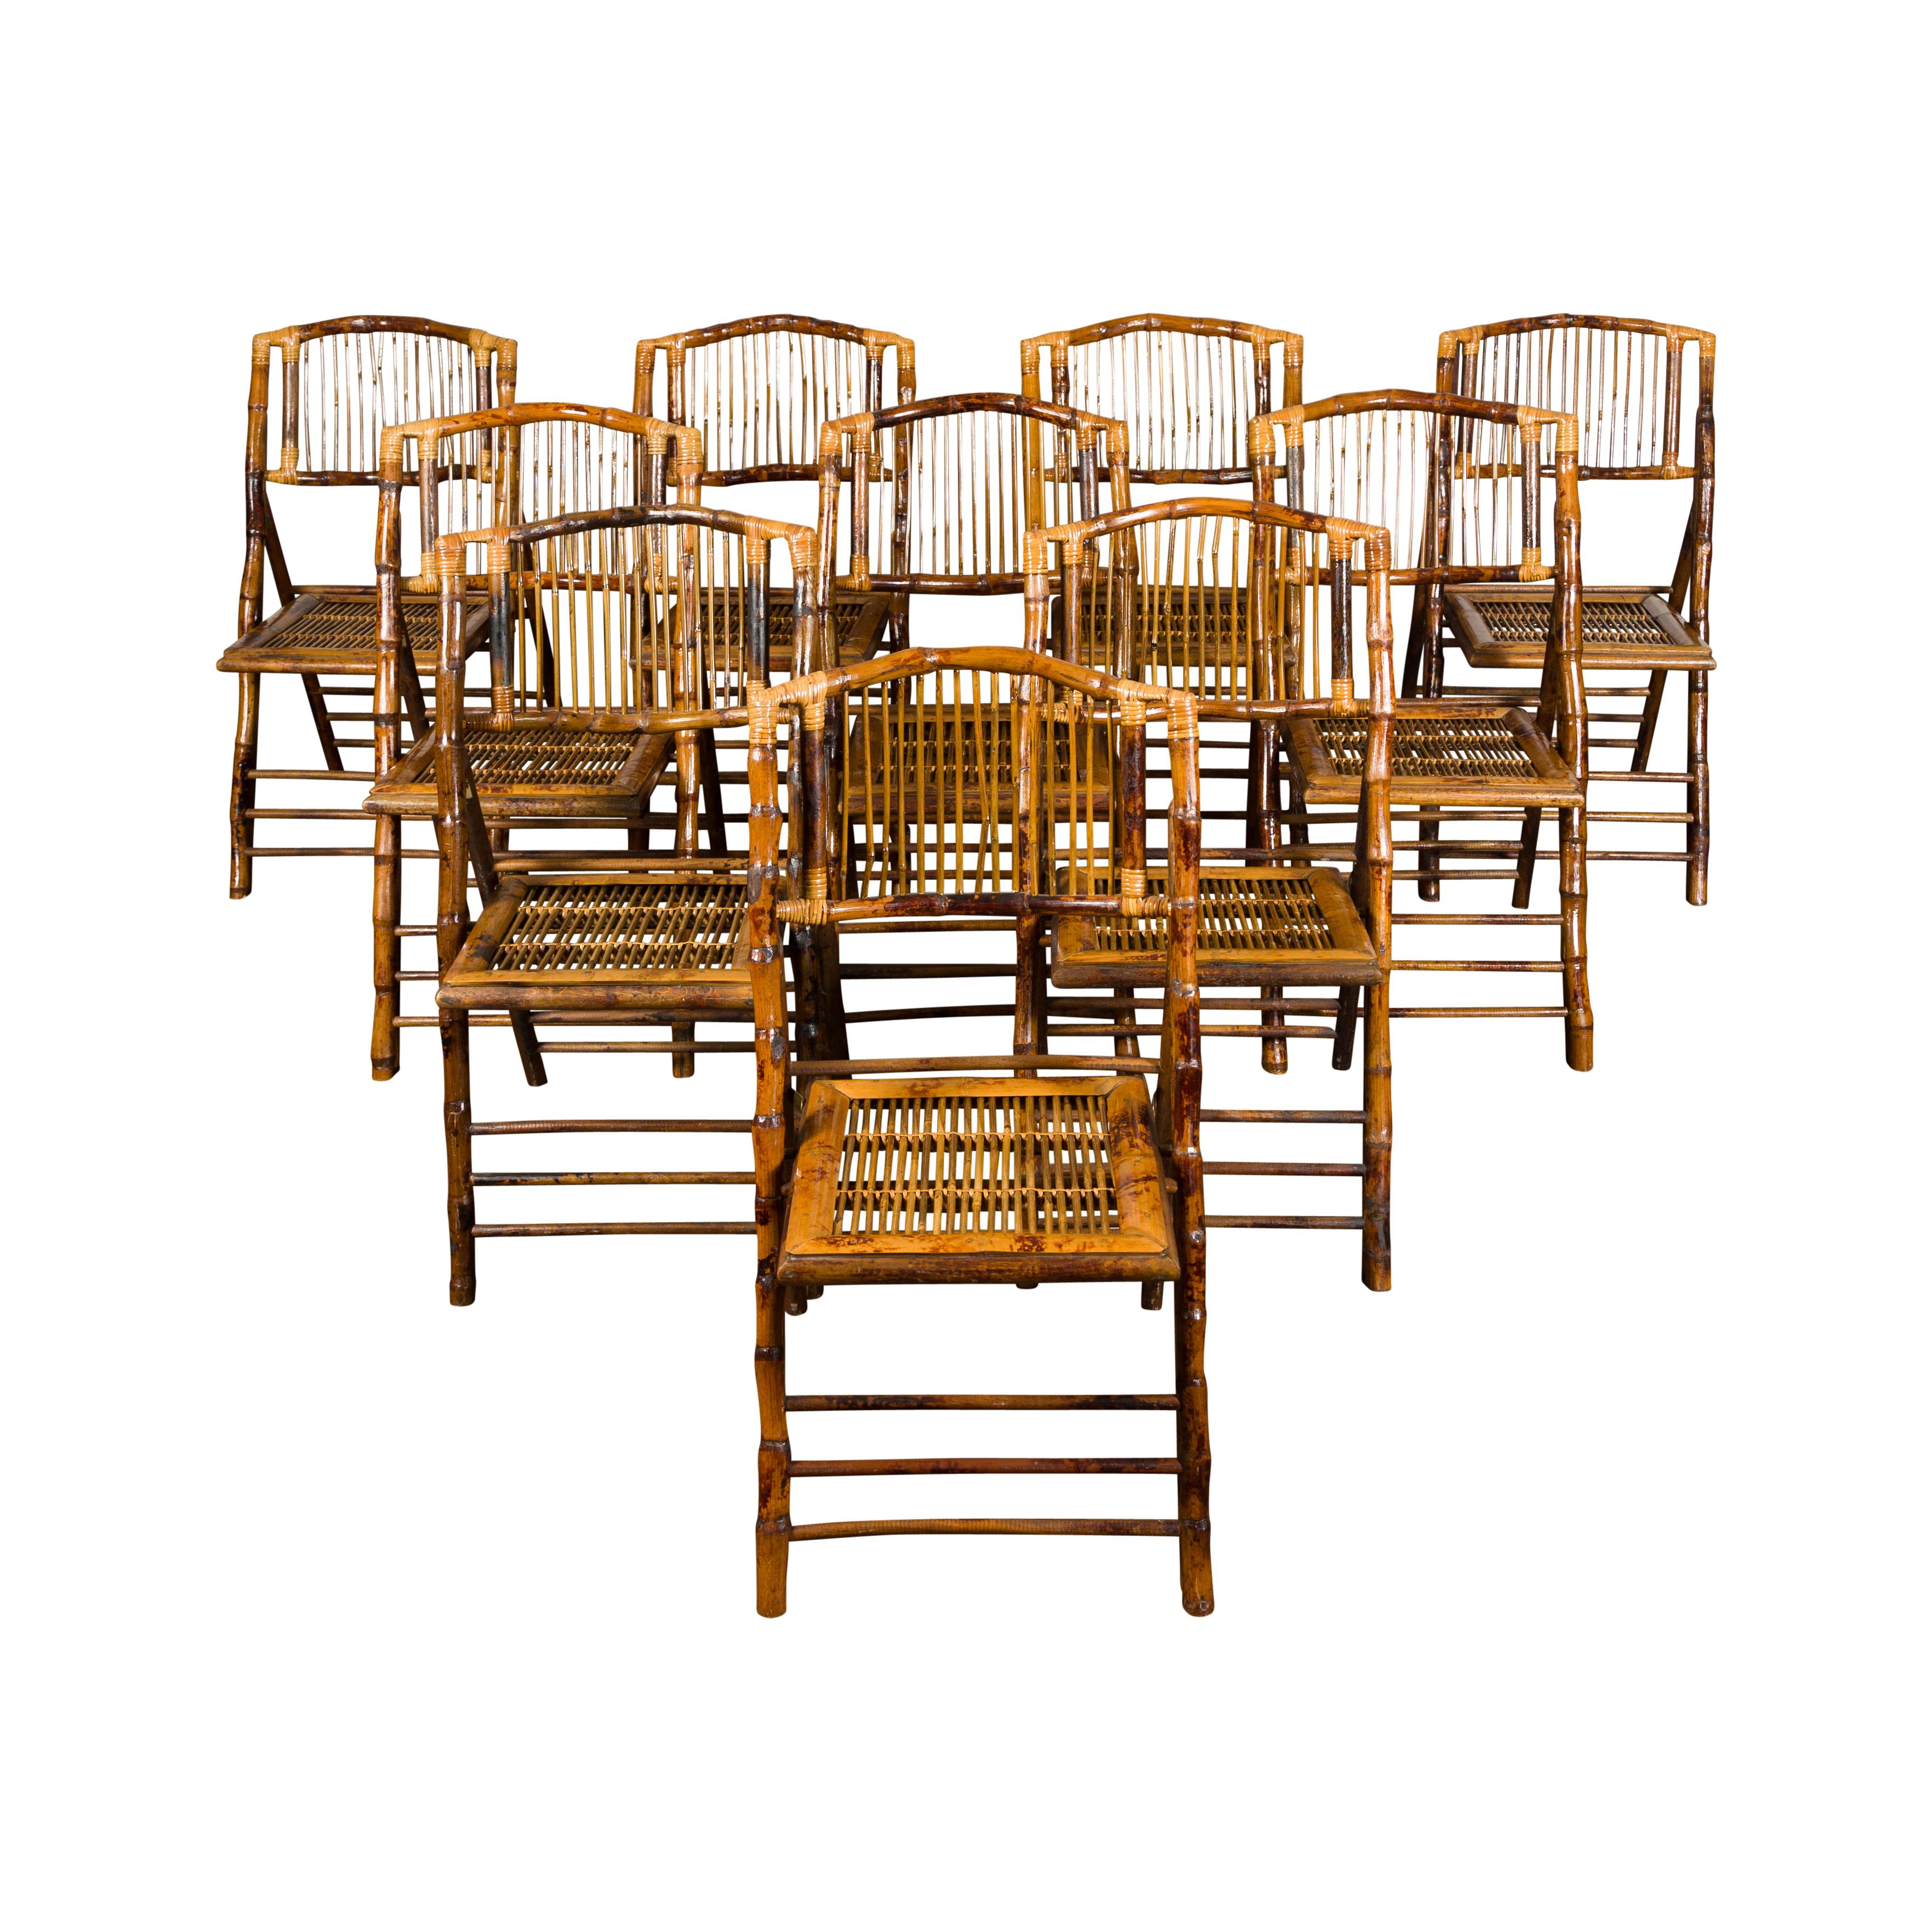 A set of ten English vintage bamboo folding side chairs from the mid-20th century, with slatted backs and rattan accents. Charming us with their rustic presence and nice patina, this set of ten midcentury bamboo folding side chairs features slightly